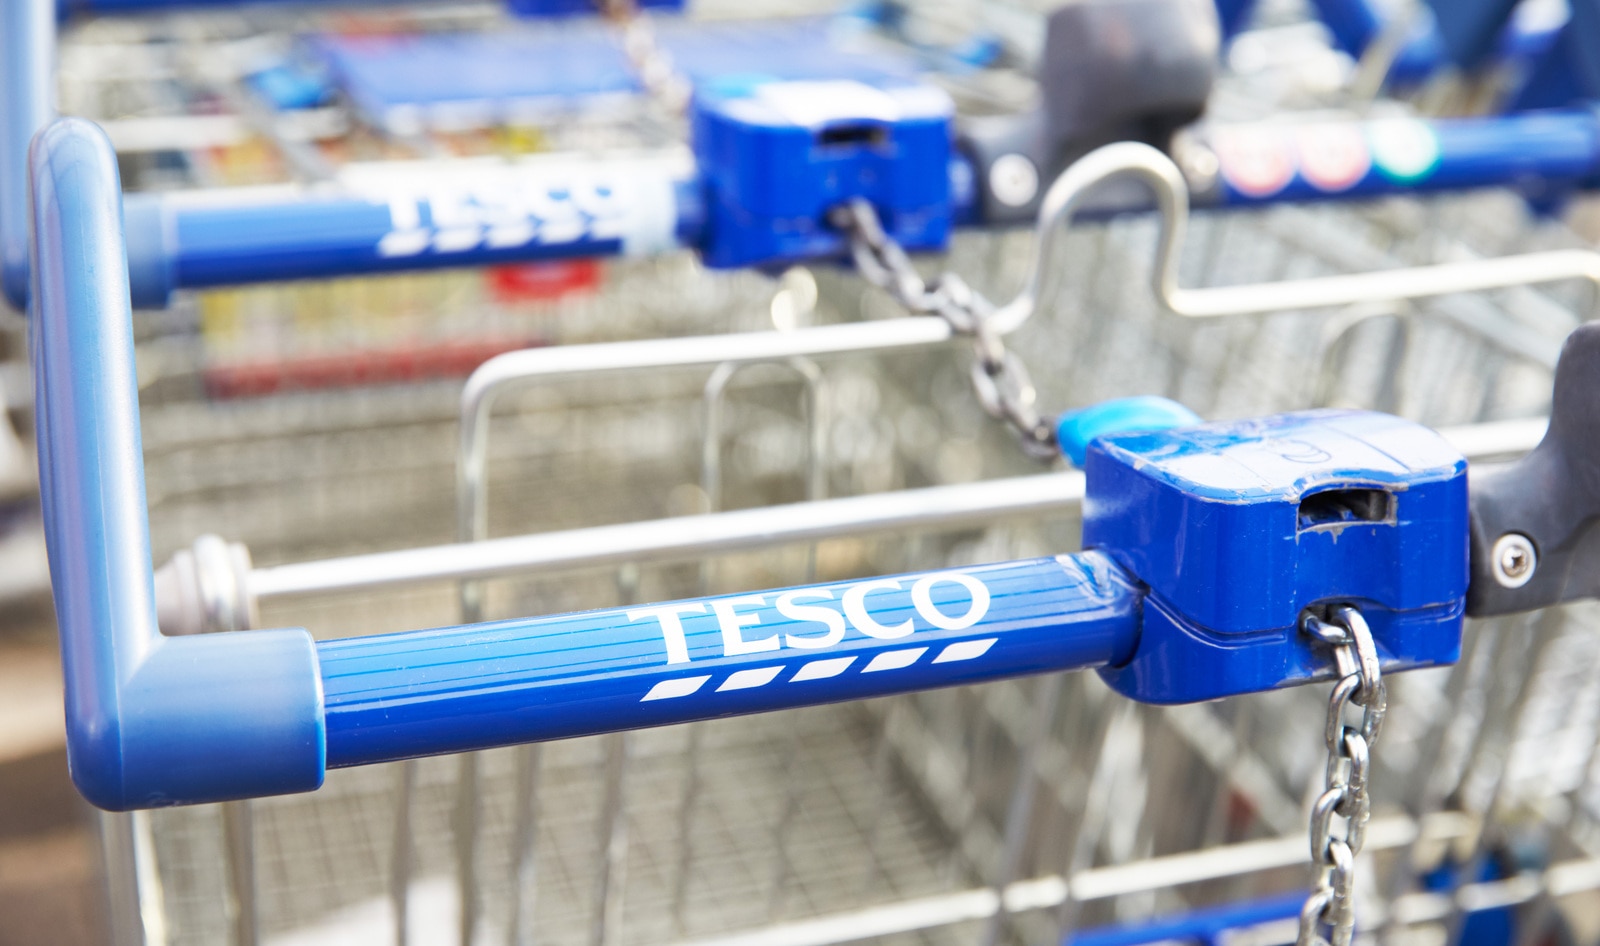 UK’s Largest Supermarket Tesco To Increase Its Vegan Meat Sales by 300 Percent by 2025&nbsp;